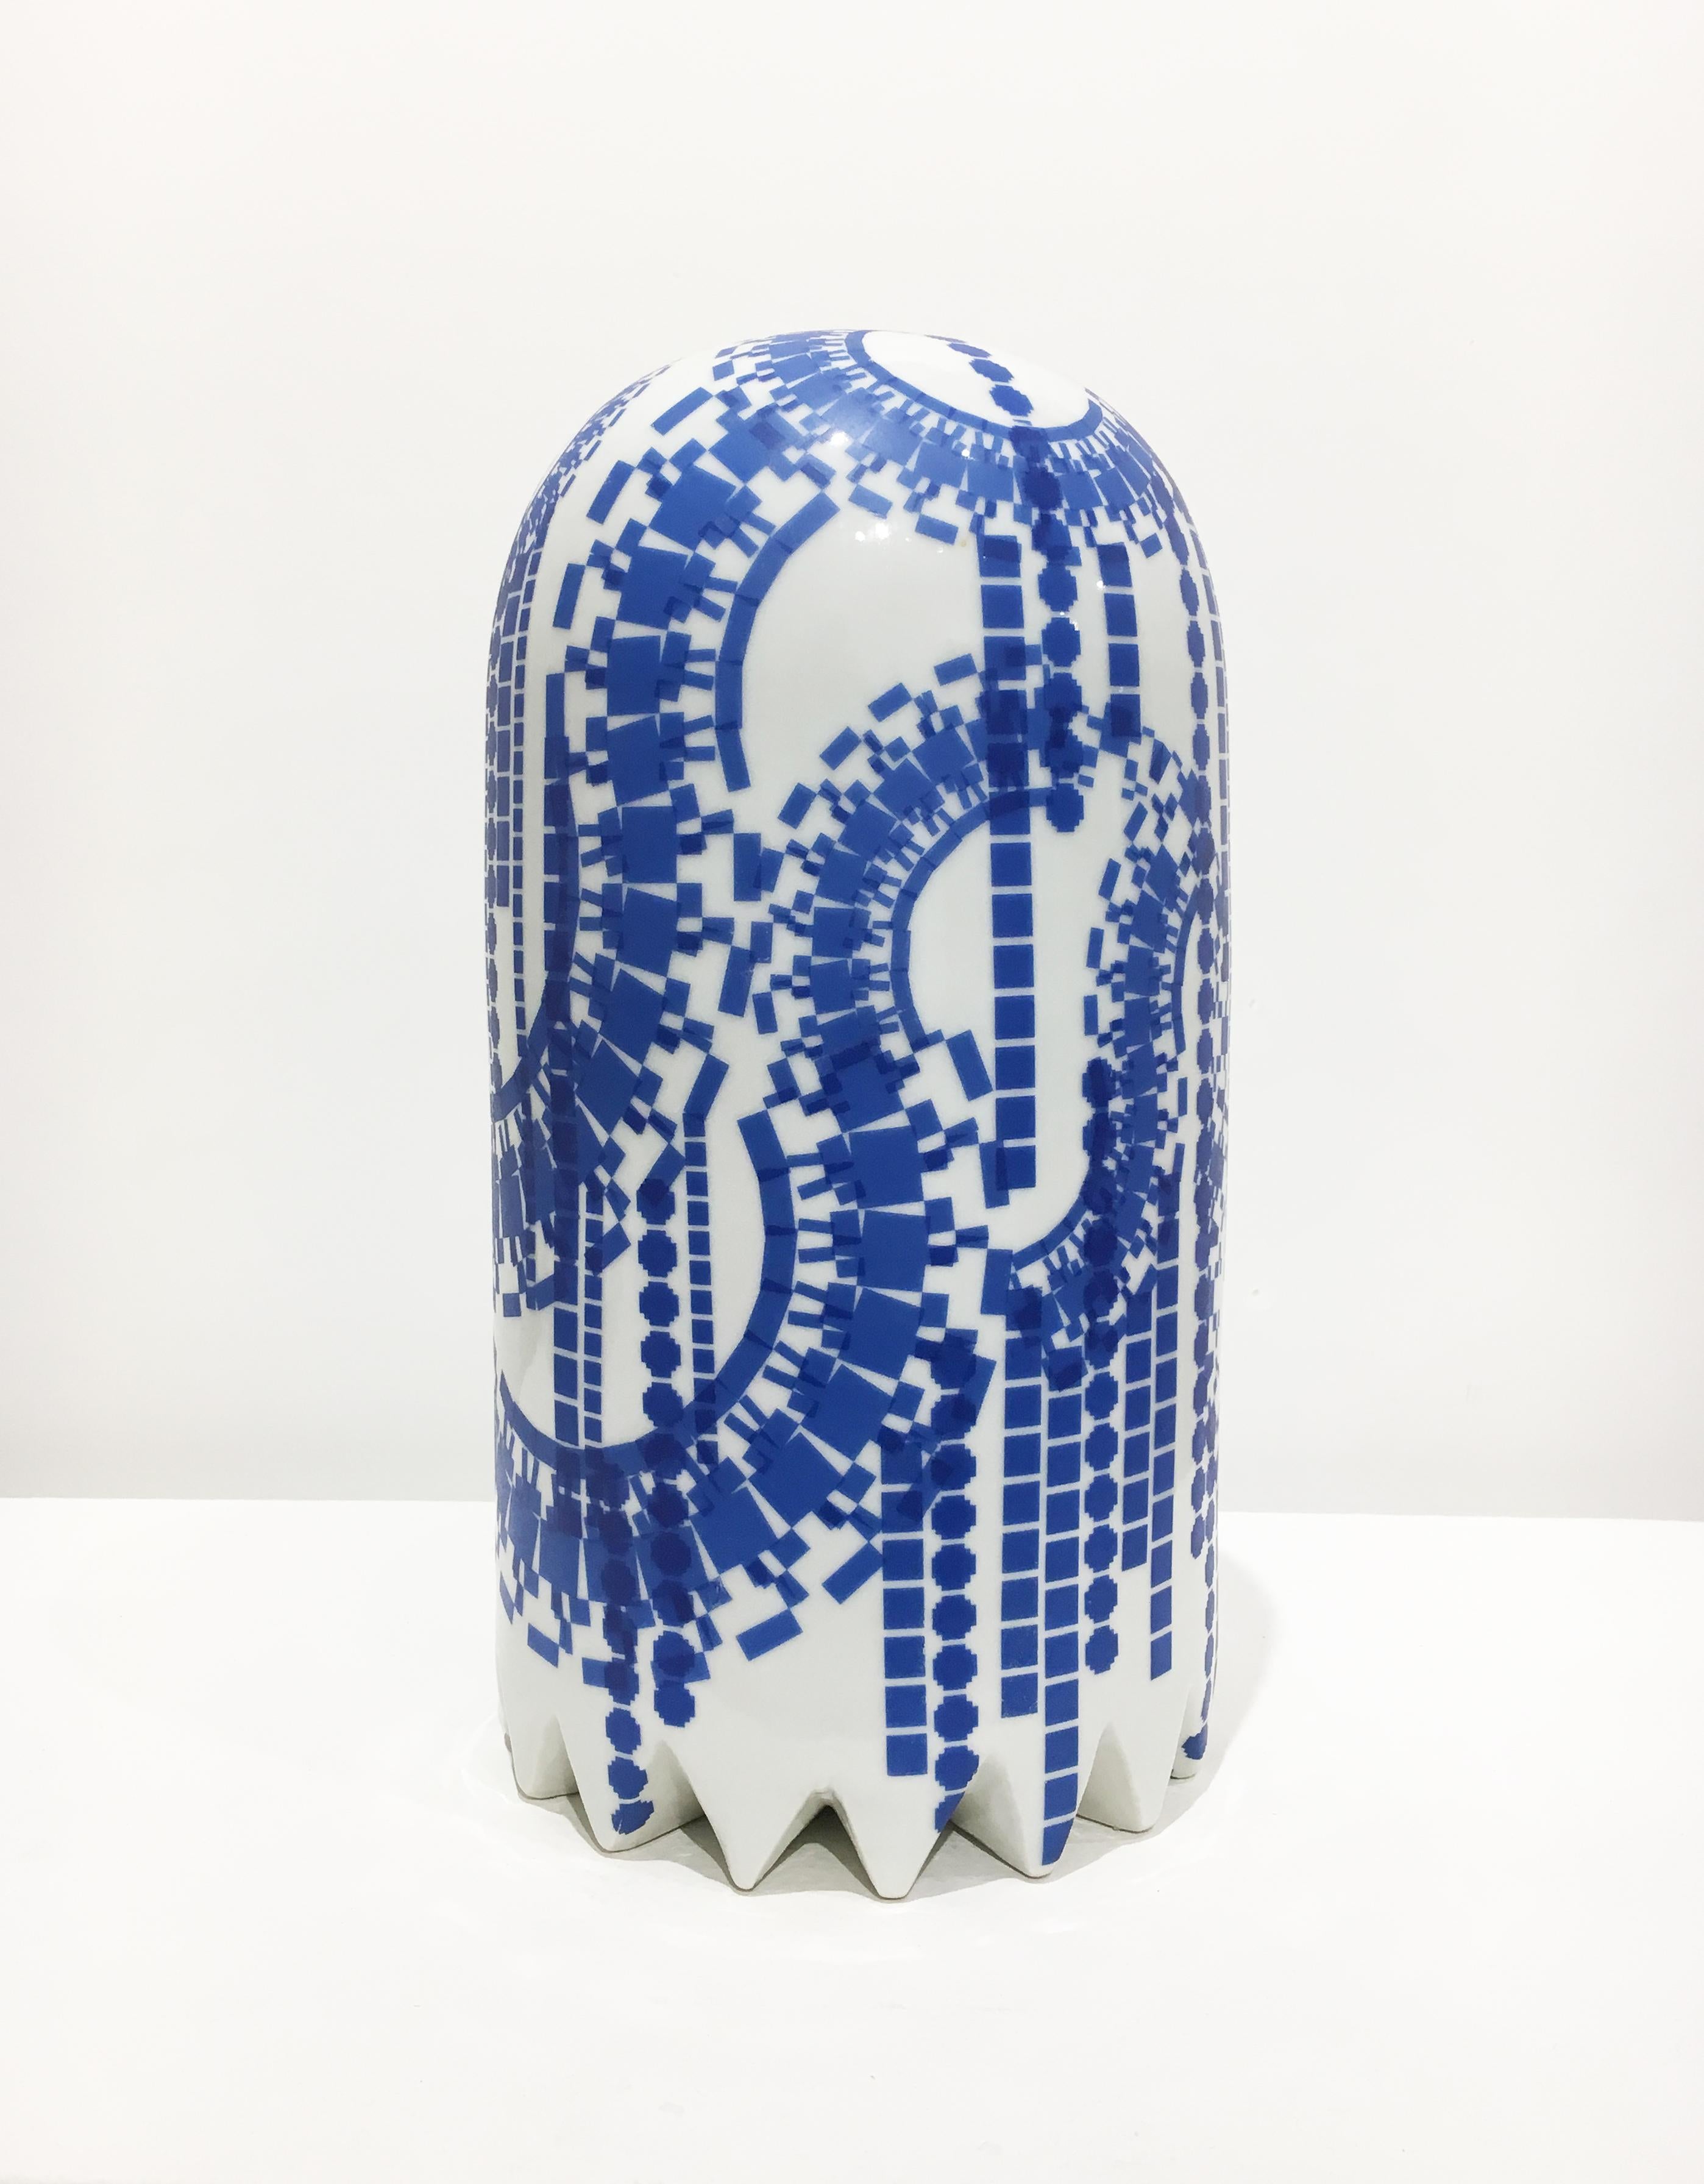 Jesse Small Abstract Sculpture - Ghost with Blue Decals, Contemporary Ceramic Porcelain Sculpture